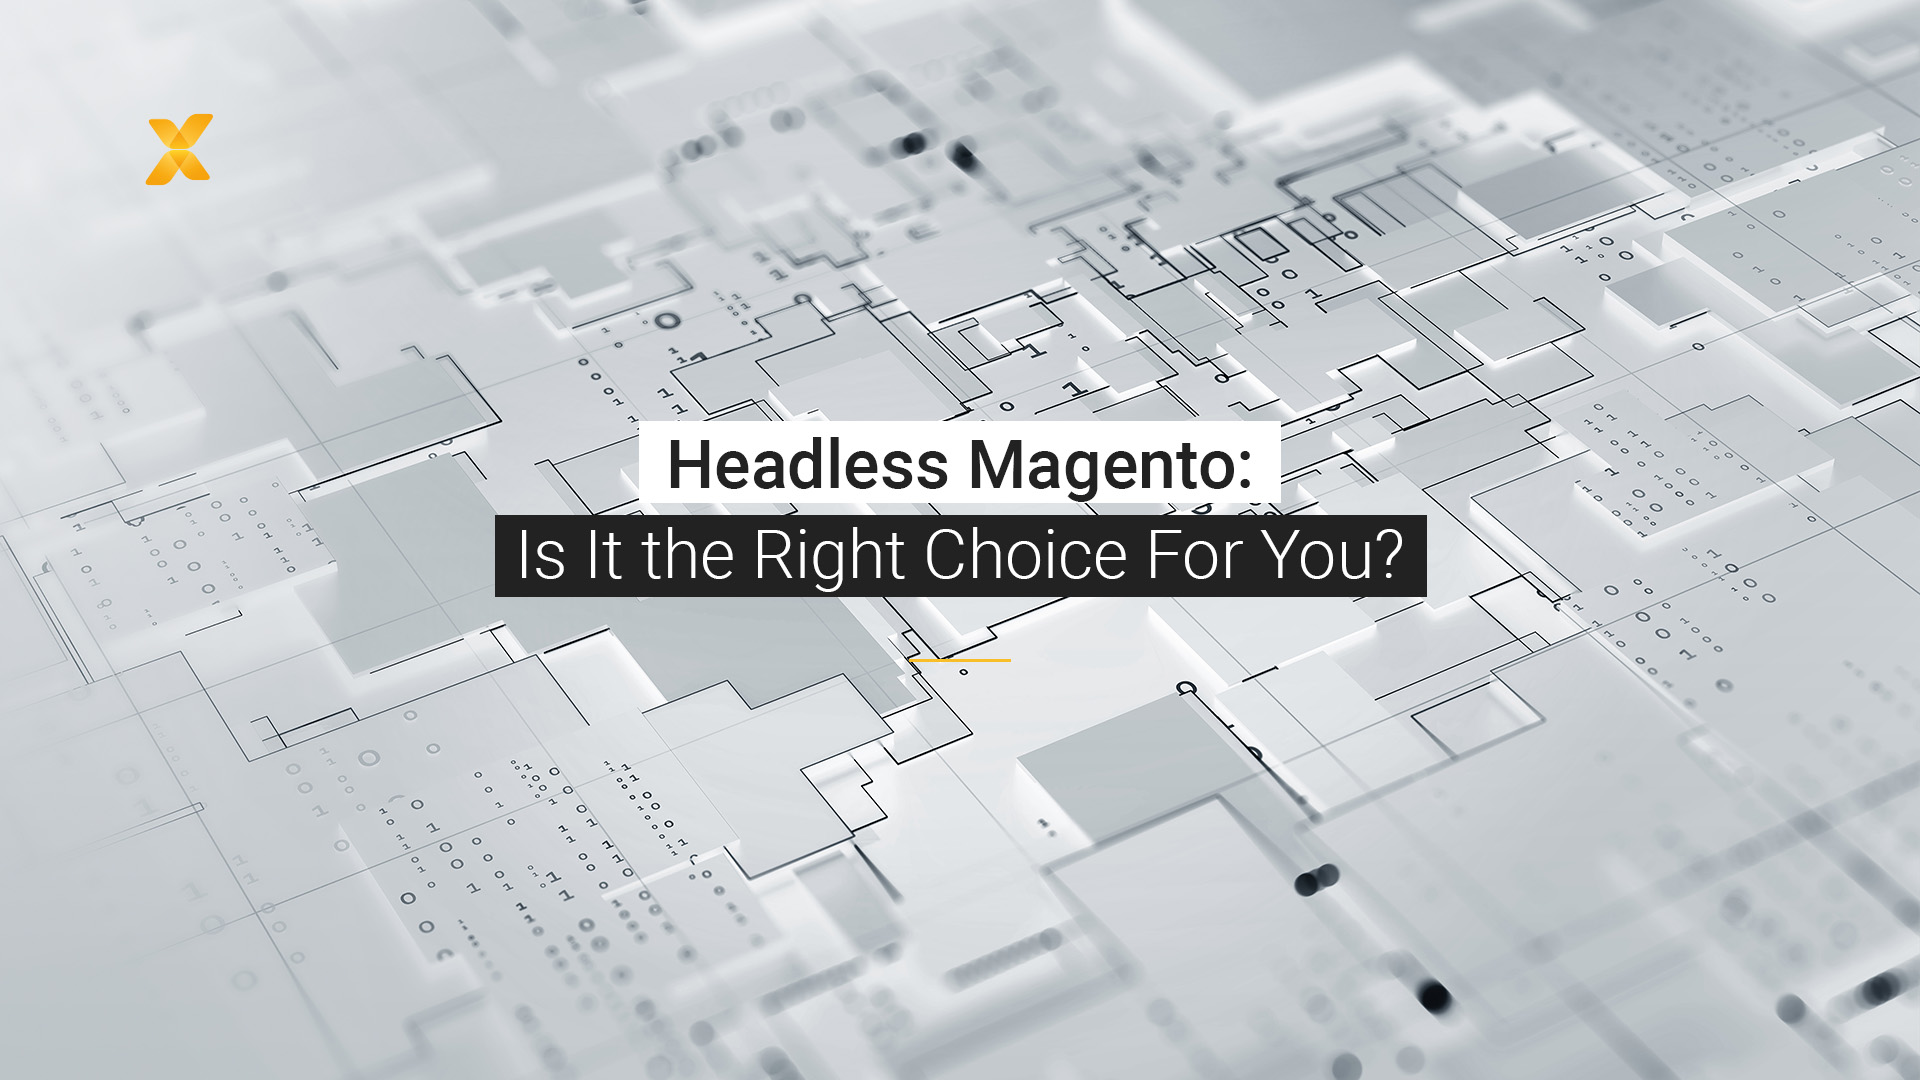 Abstract image with title "Headless Magento: Is It the Right Choice for You?"